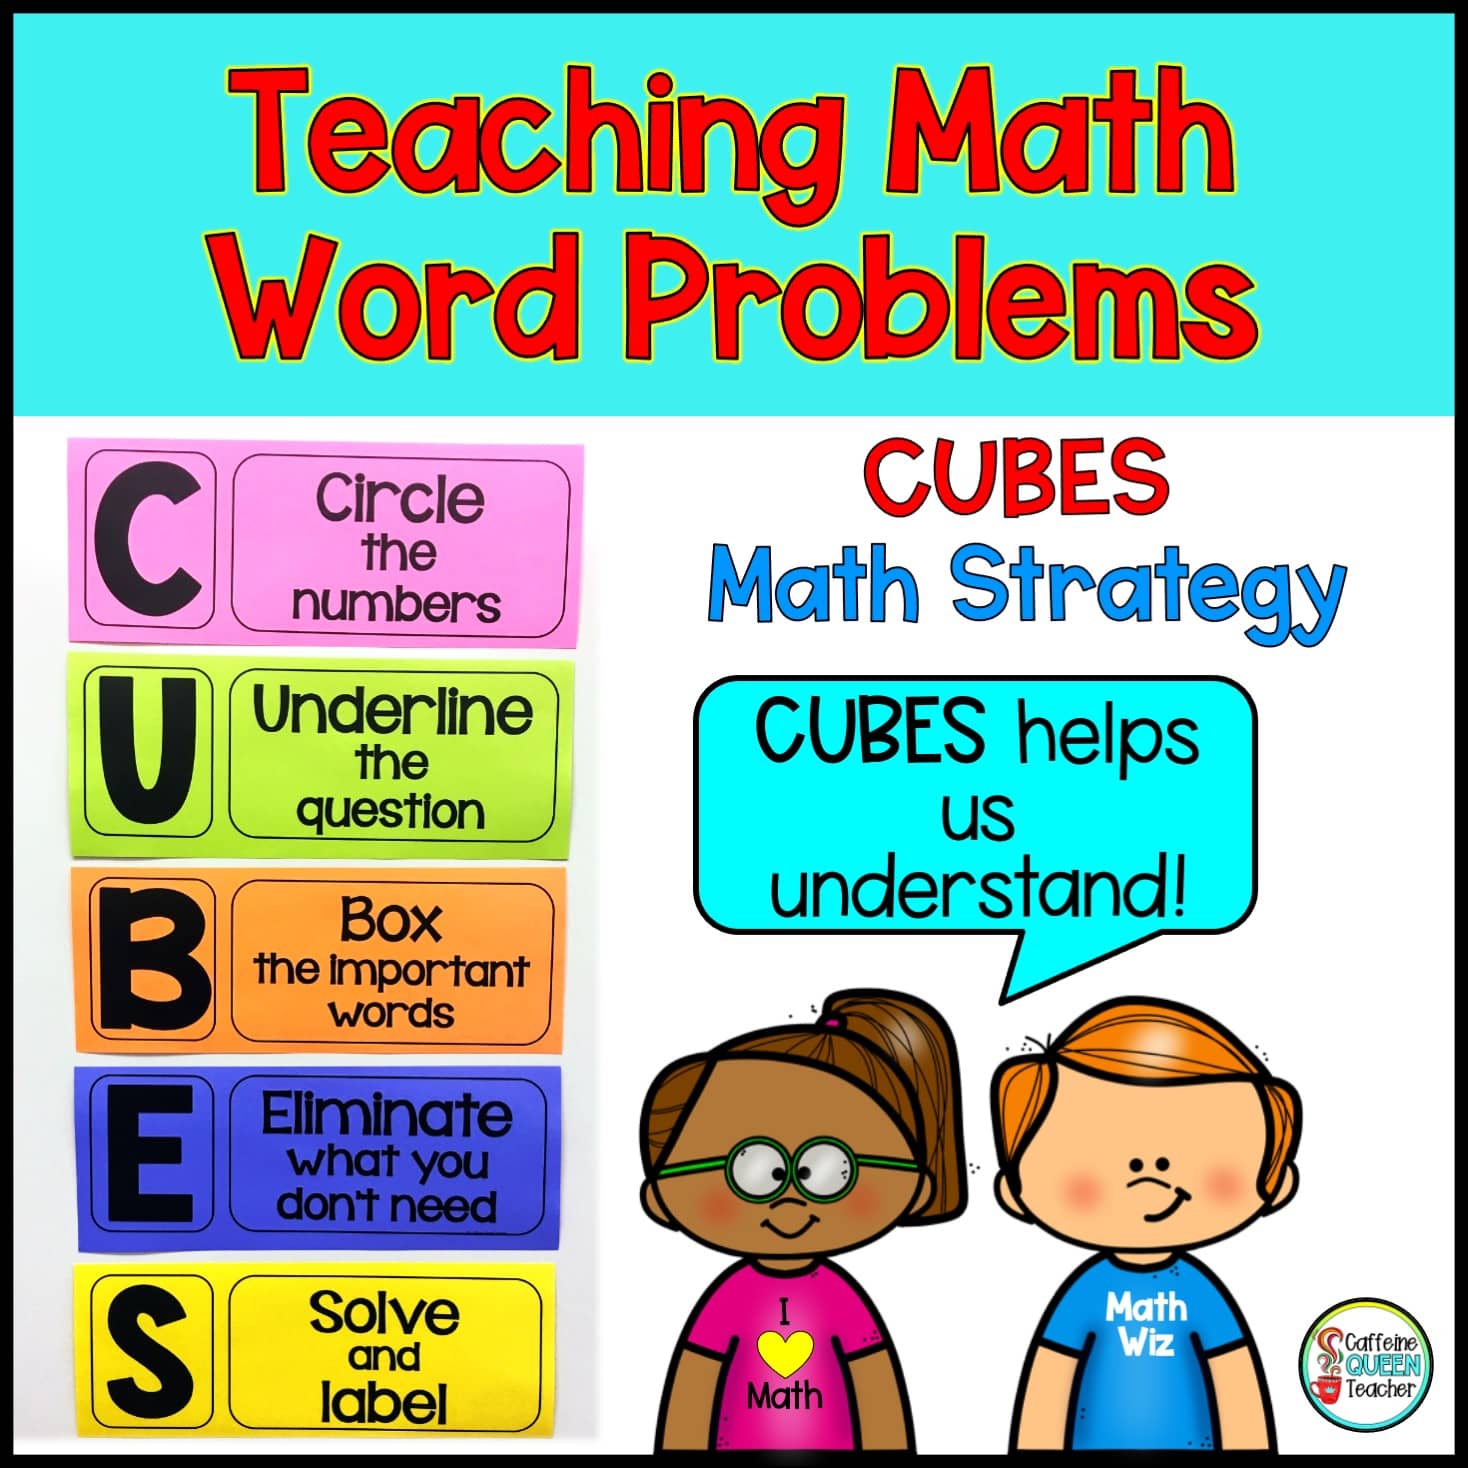 CUBES word problem strategy helps students understand how to solve story problems